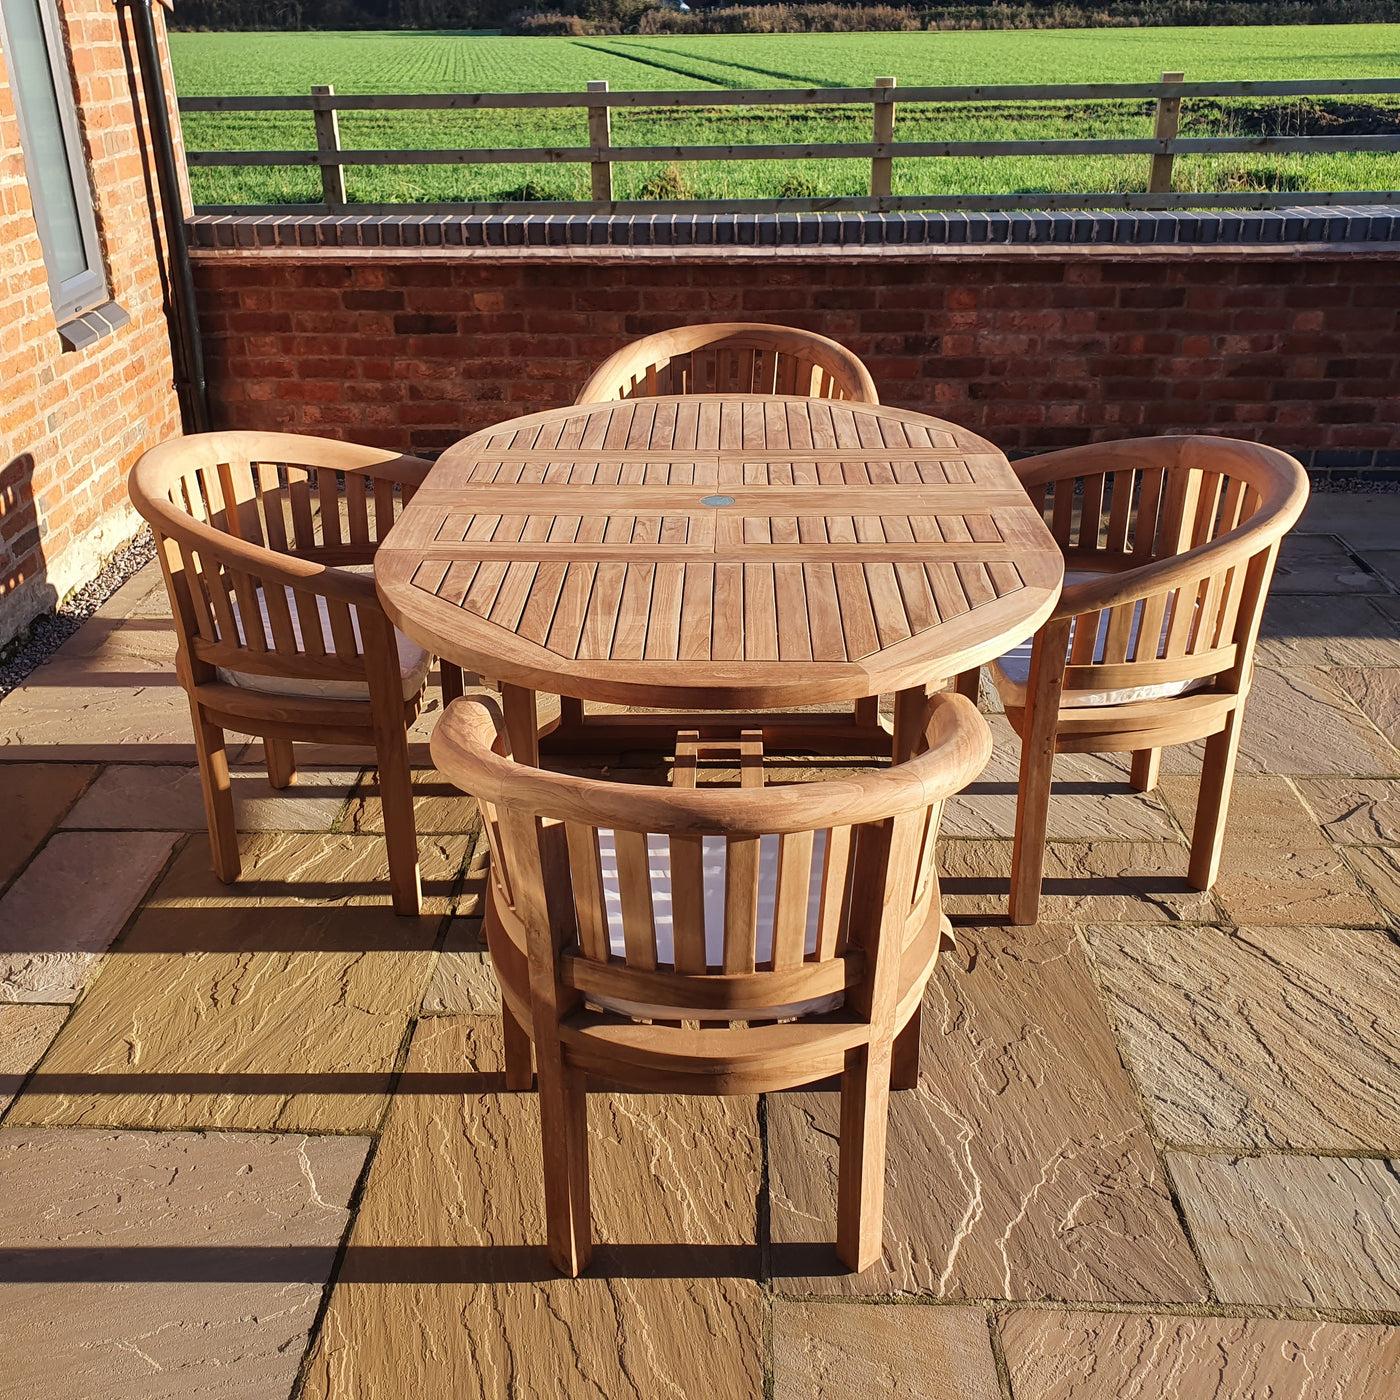 A Round To Oval 120-170cm Extending Table & 4 San Francisco Chairs Complete set Cushions Free Delivery with four matching chairs on a stone patio, sunlight casting shadows, with a grassy field and a fence in the background.